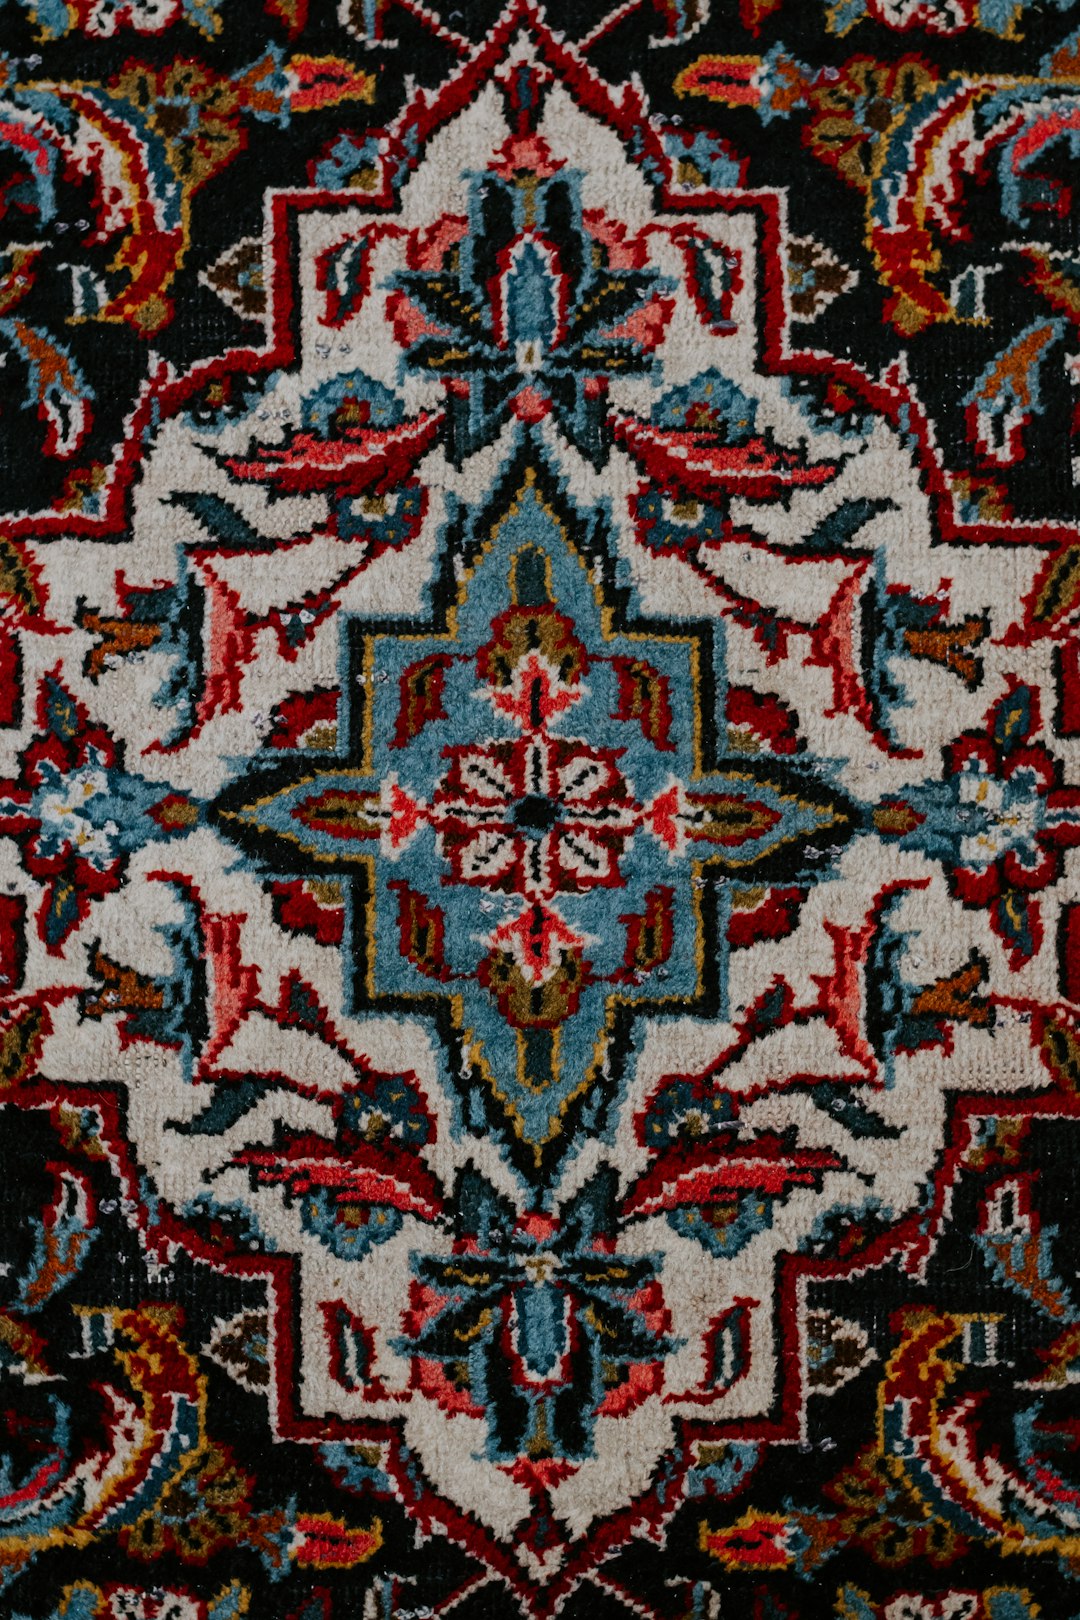  red white and black floral textile carpet